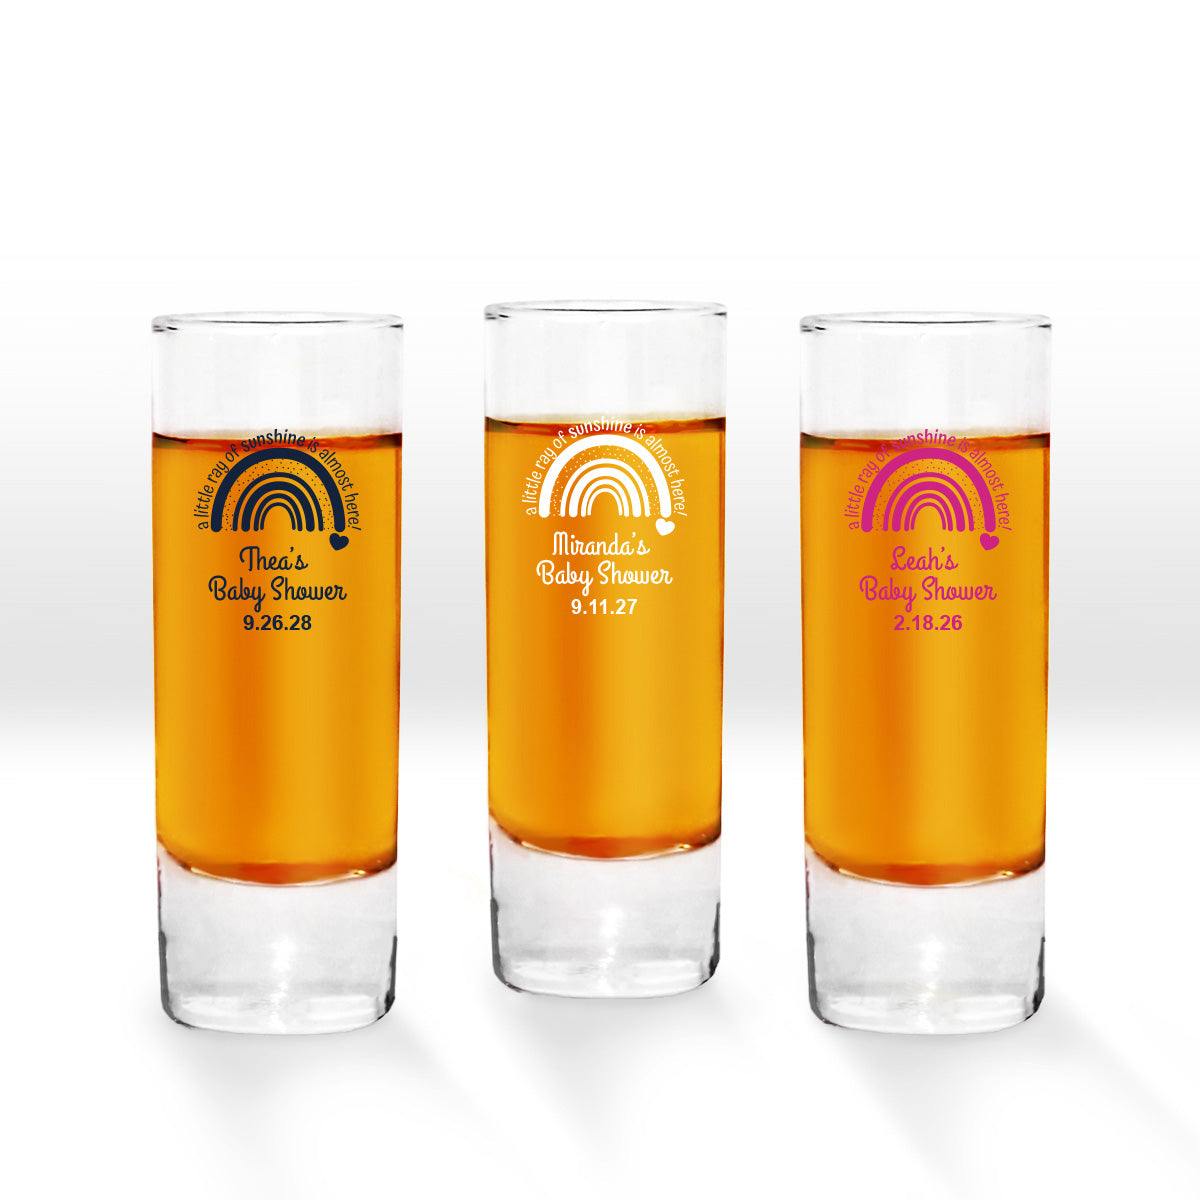 Thea’s Baby Shower Personalized Tall Shot Glass (Set of 24)